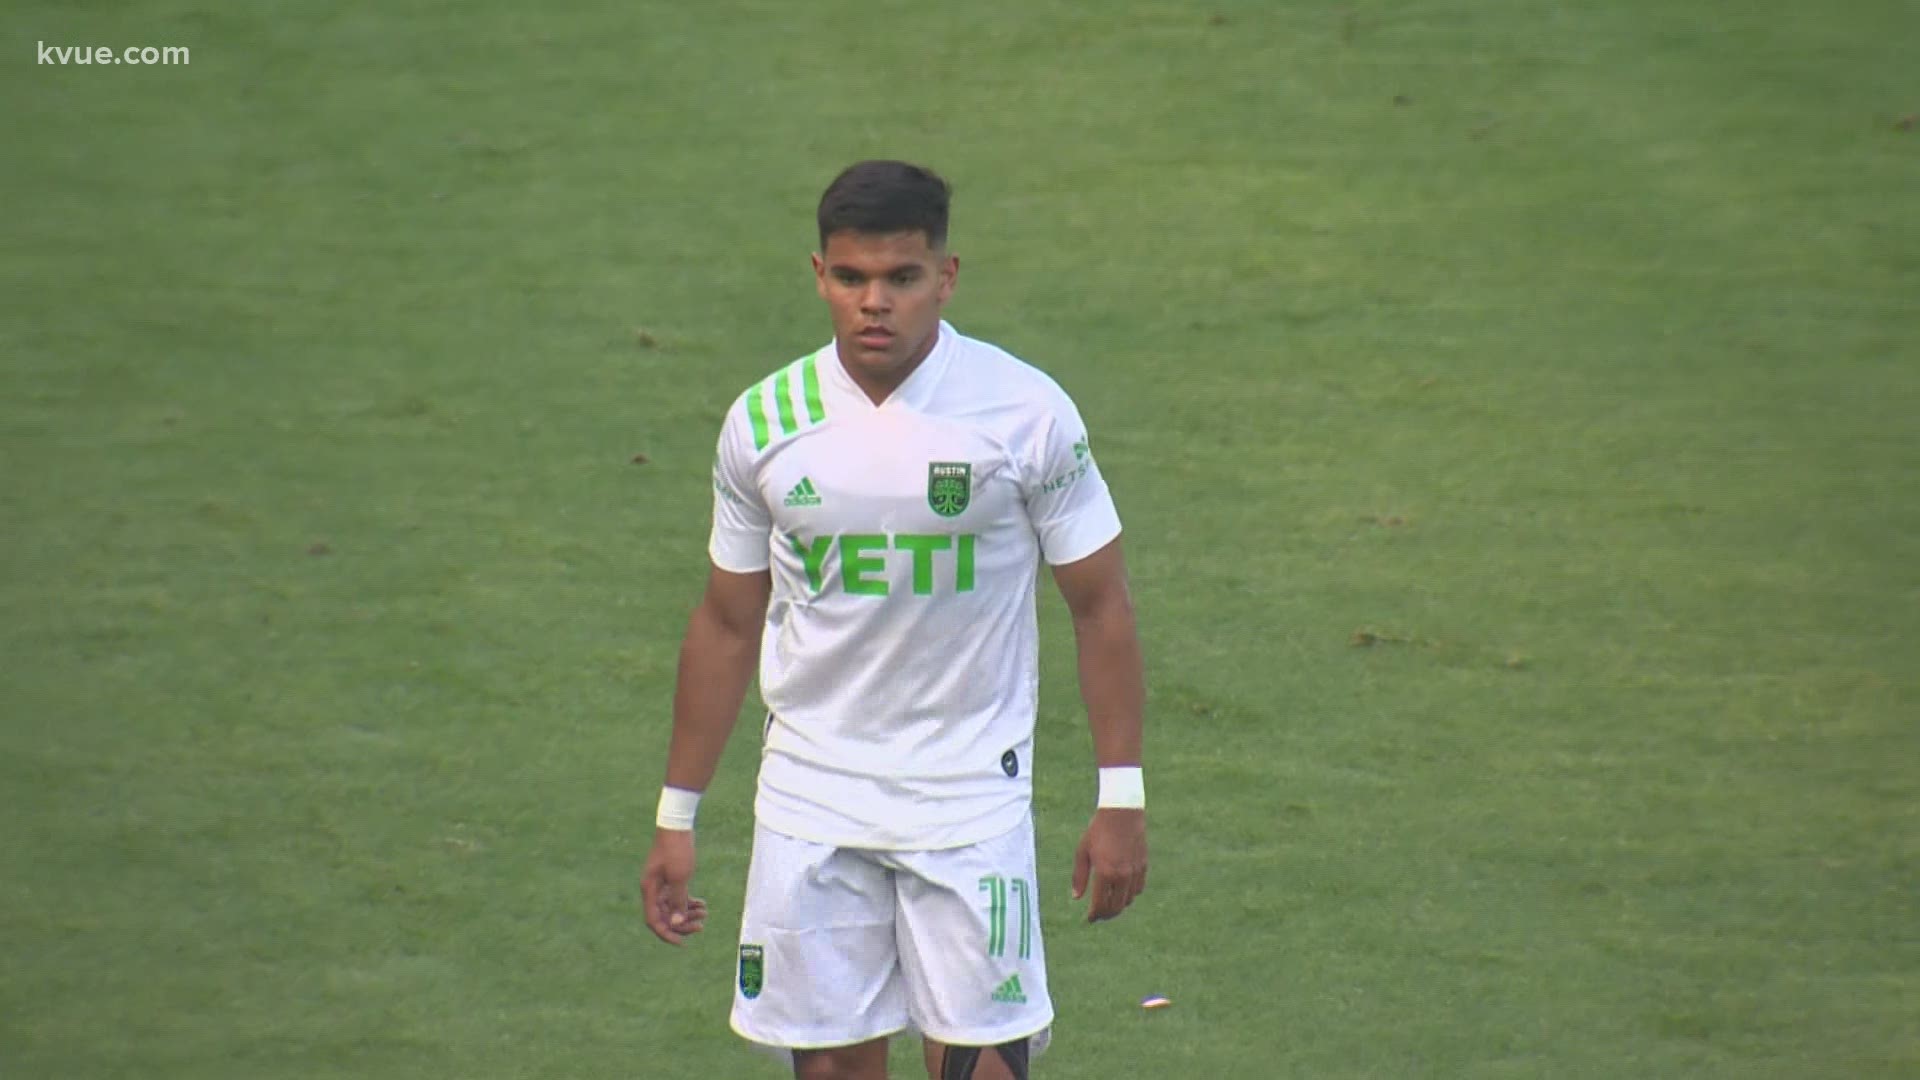 Austin FC vs. LAFC: It was the first match in franchise history. KVUE has all the highlights in our post-match report.